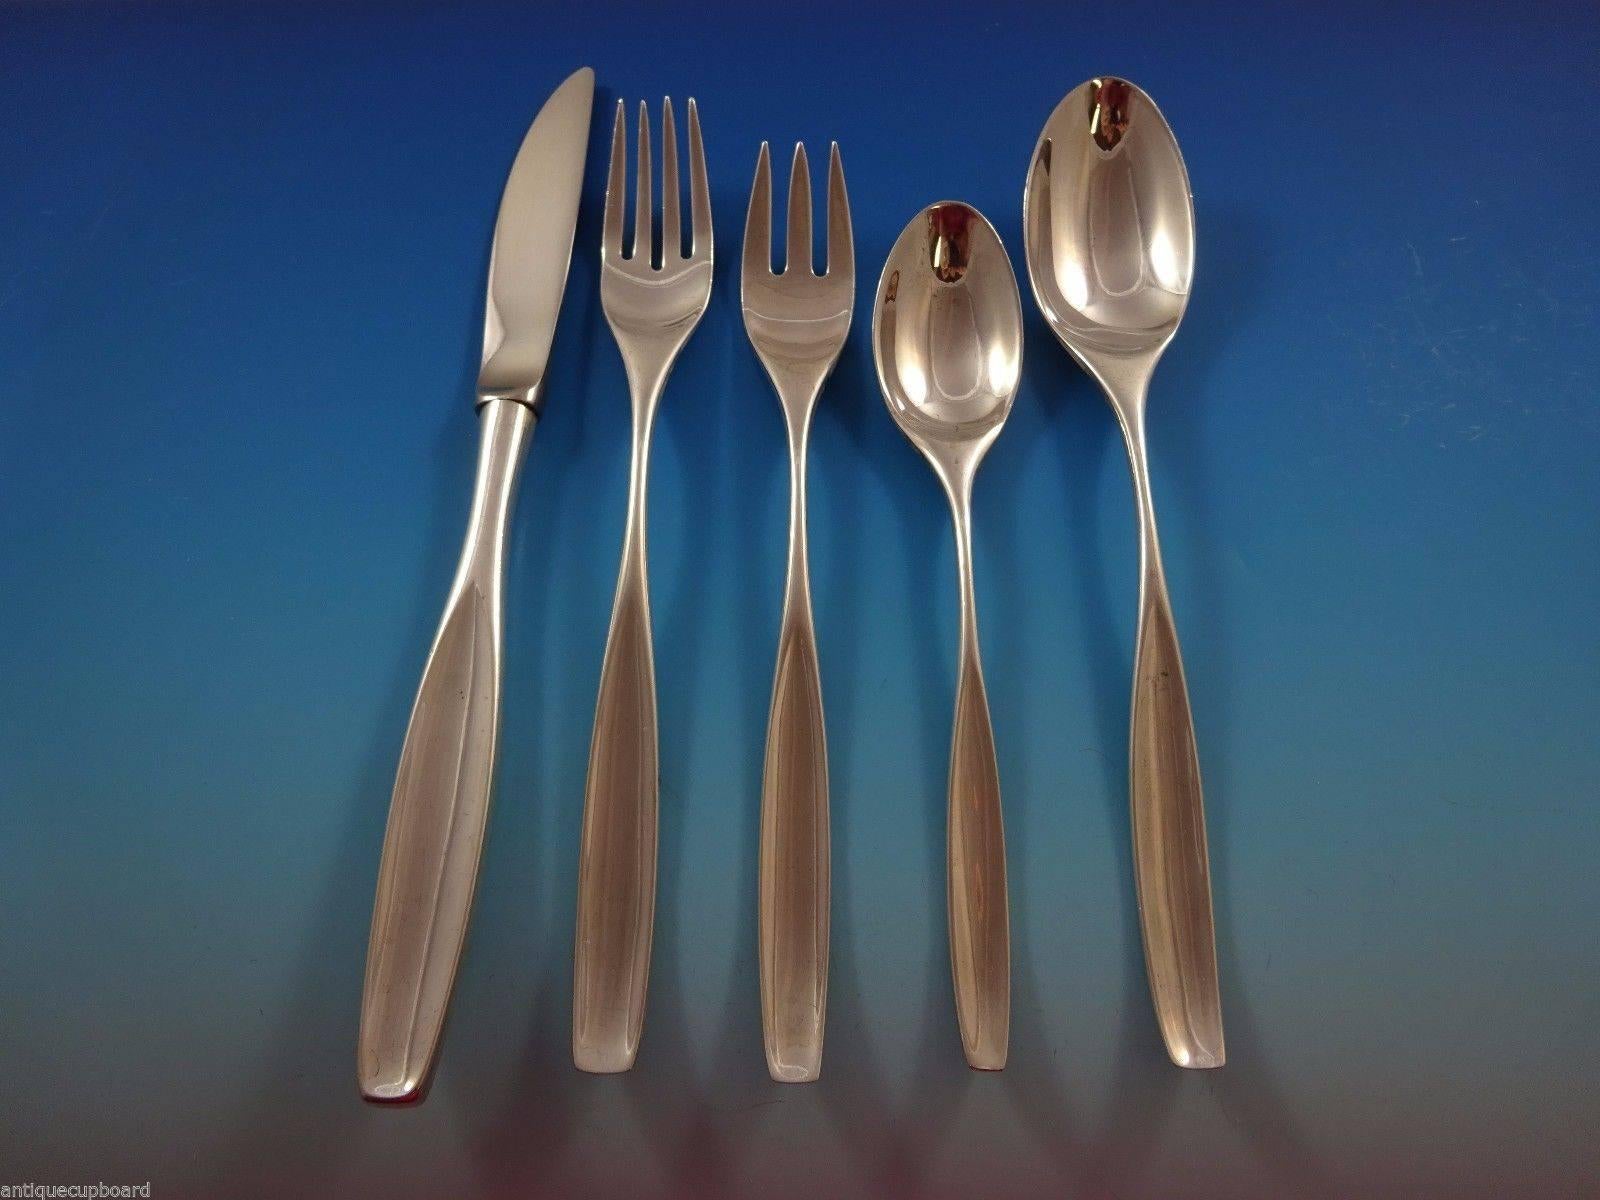 Mid-Century Modern set of Ellipse by Kirk sterling silver flatware - 43 Pieces. 
This set includes:

Eight knives, 8 7/8